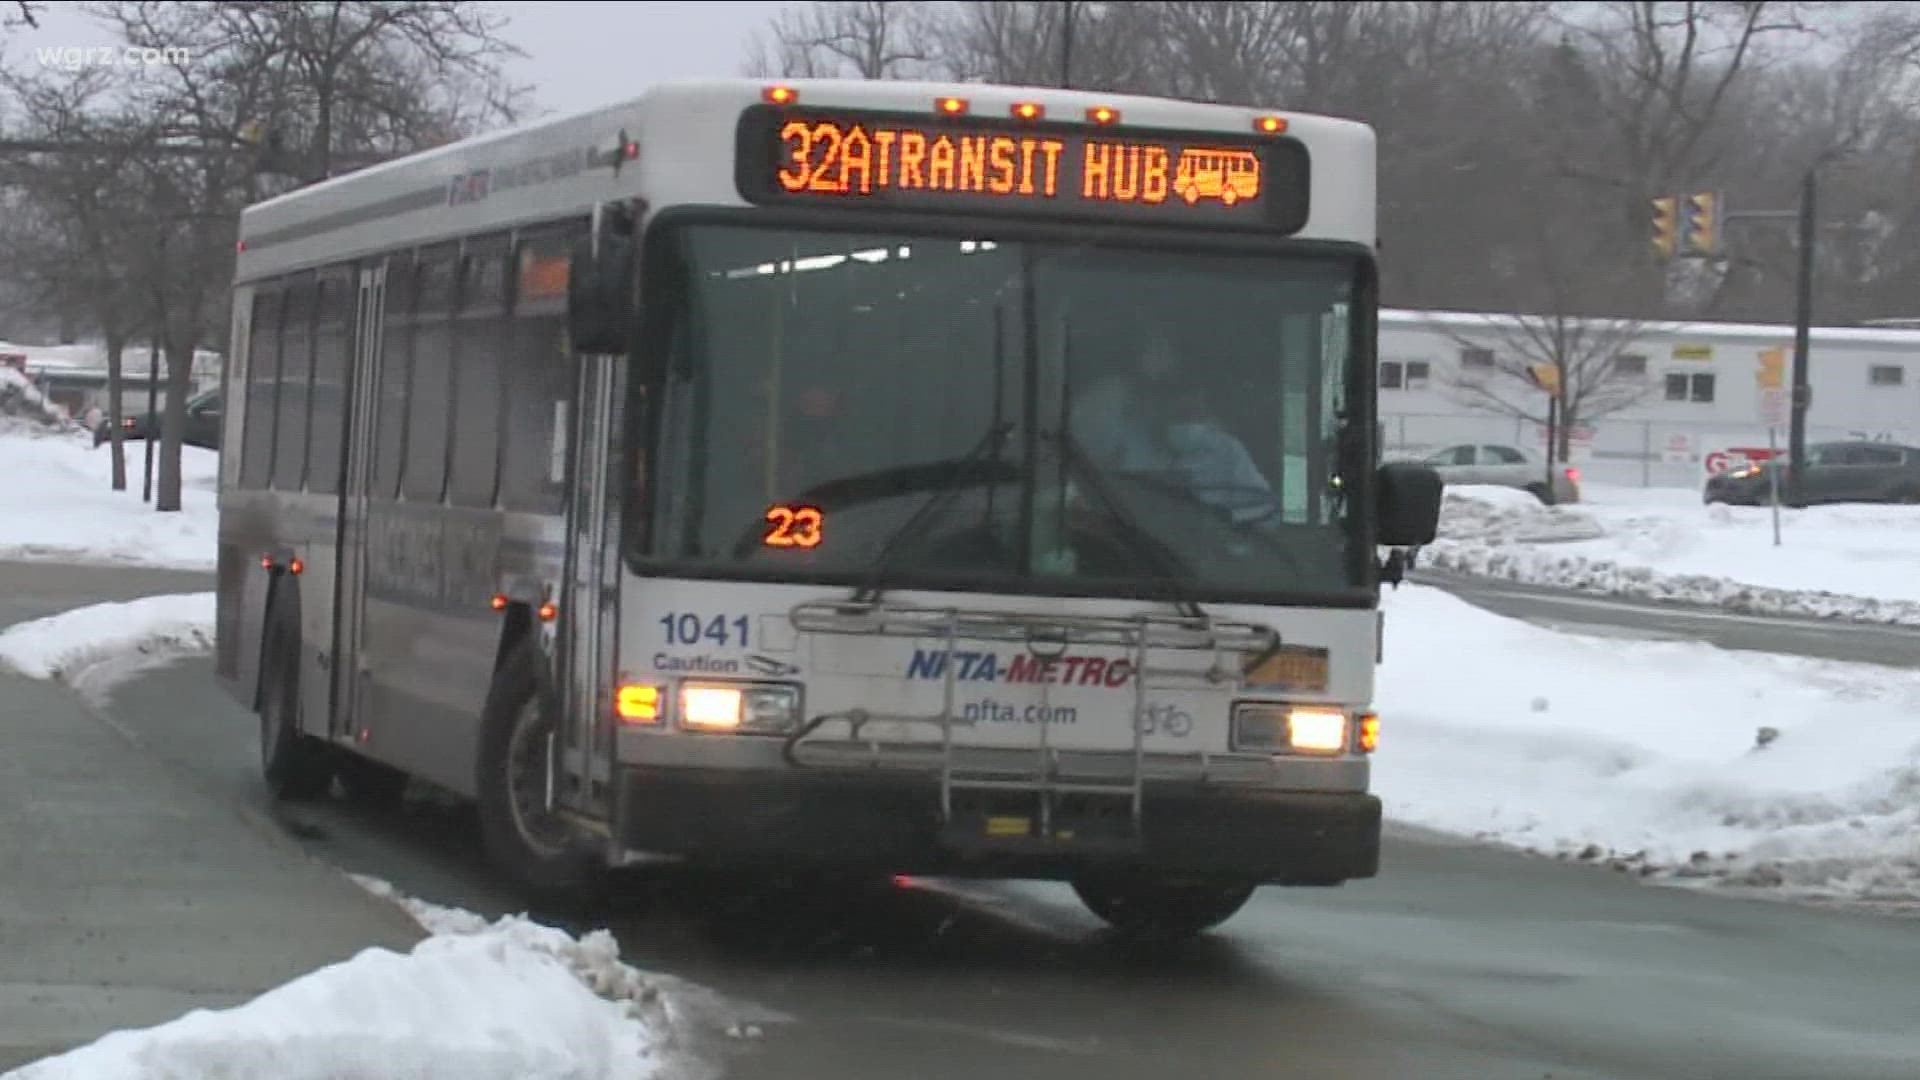 Staffing shortages has now forced the NFTA to cut back on services, what customers can expect on the new decisions.